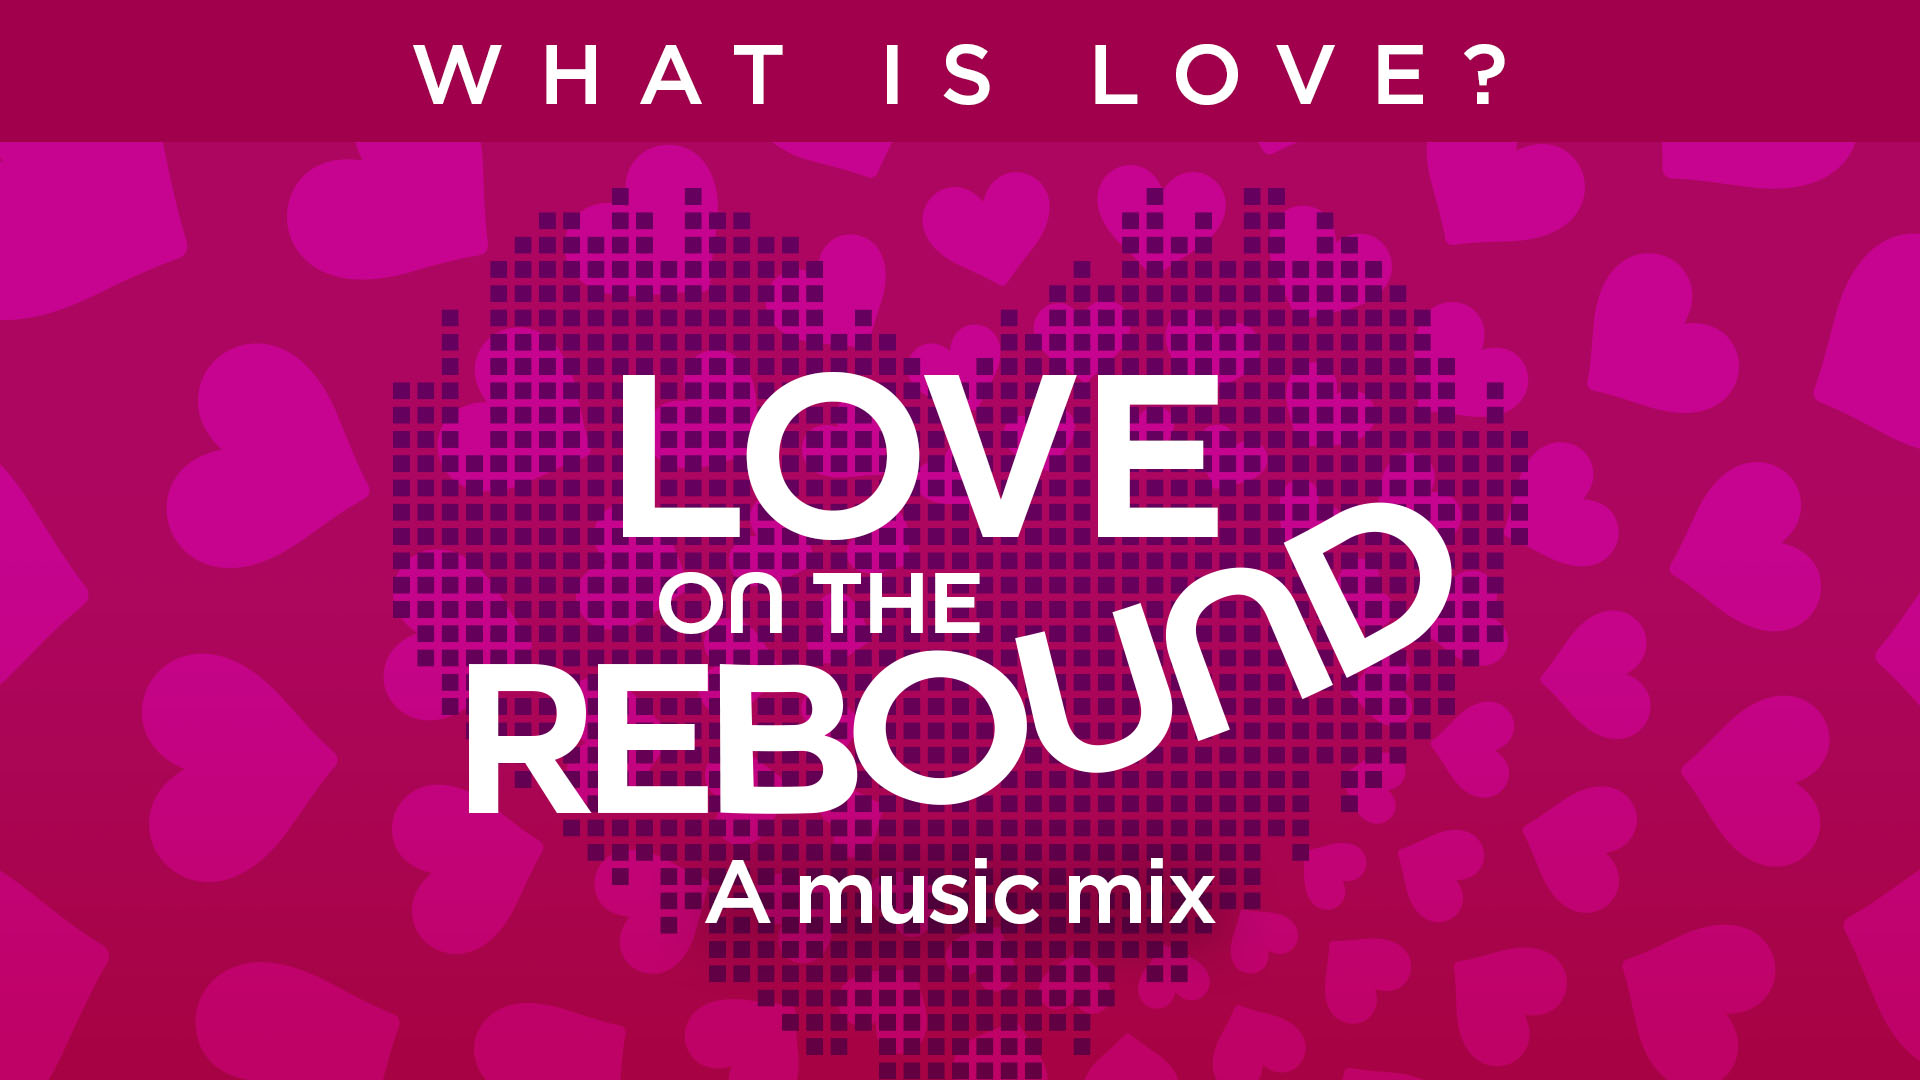 What Is Love? Love on the Rebound - A Music Mix